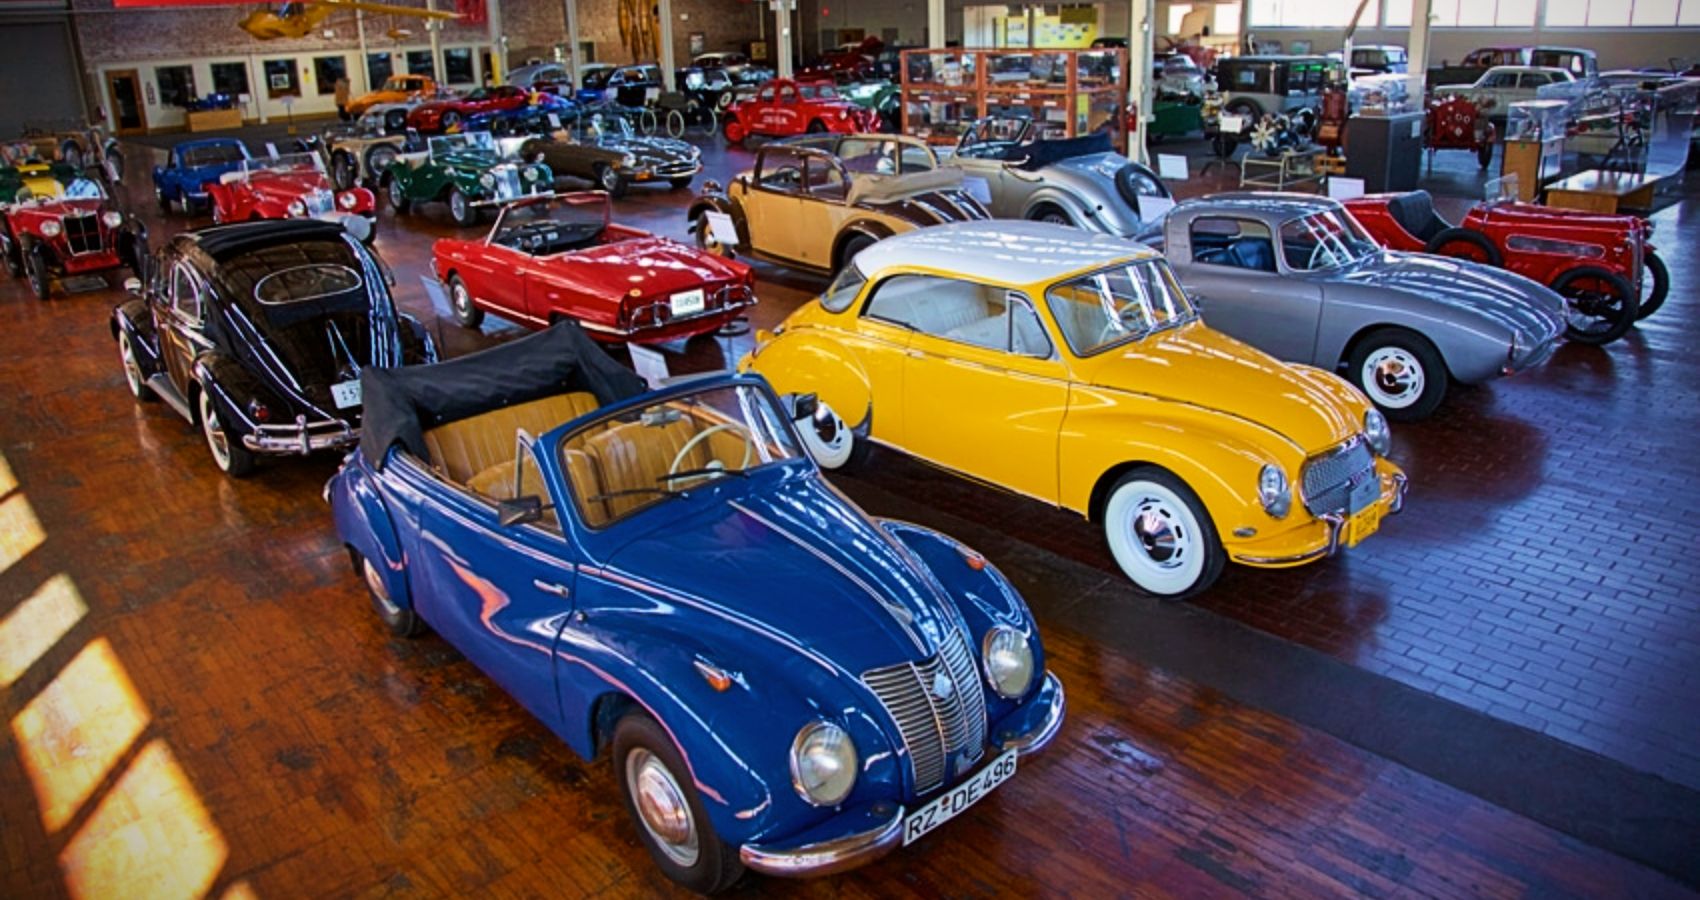 The Most Unusual And Rarest Car Collection In The World Is Full Of Baffling Surprises